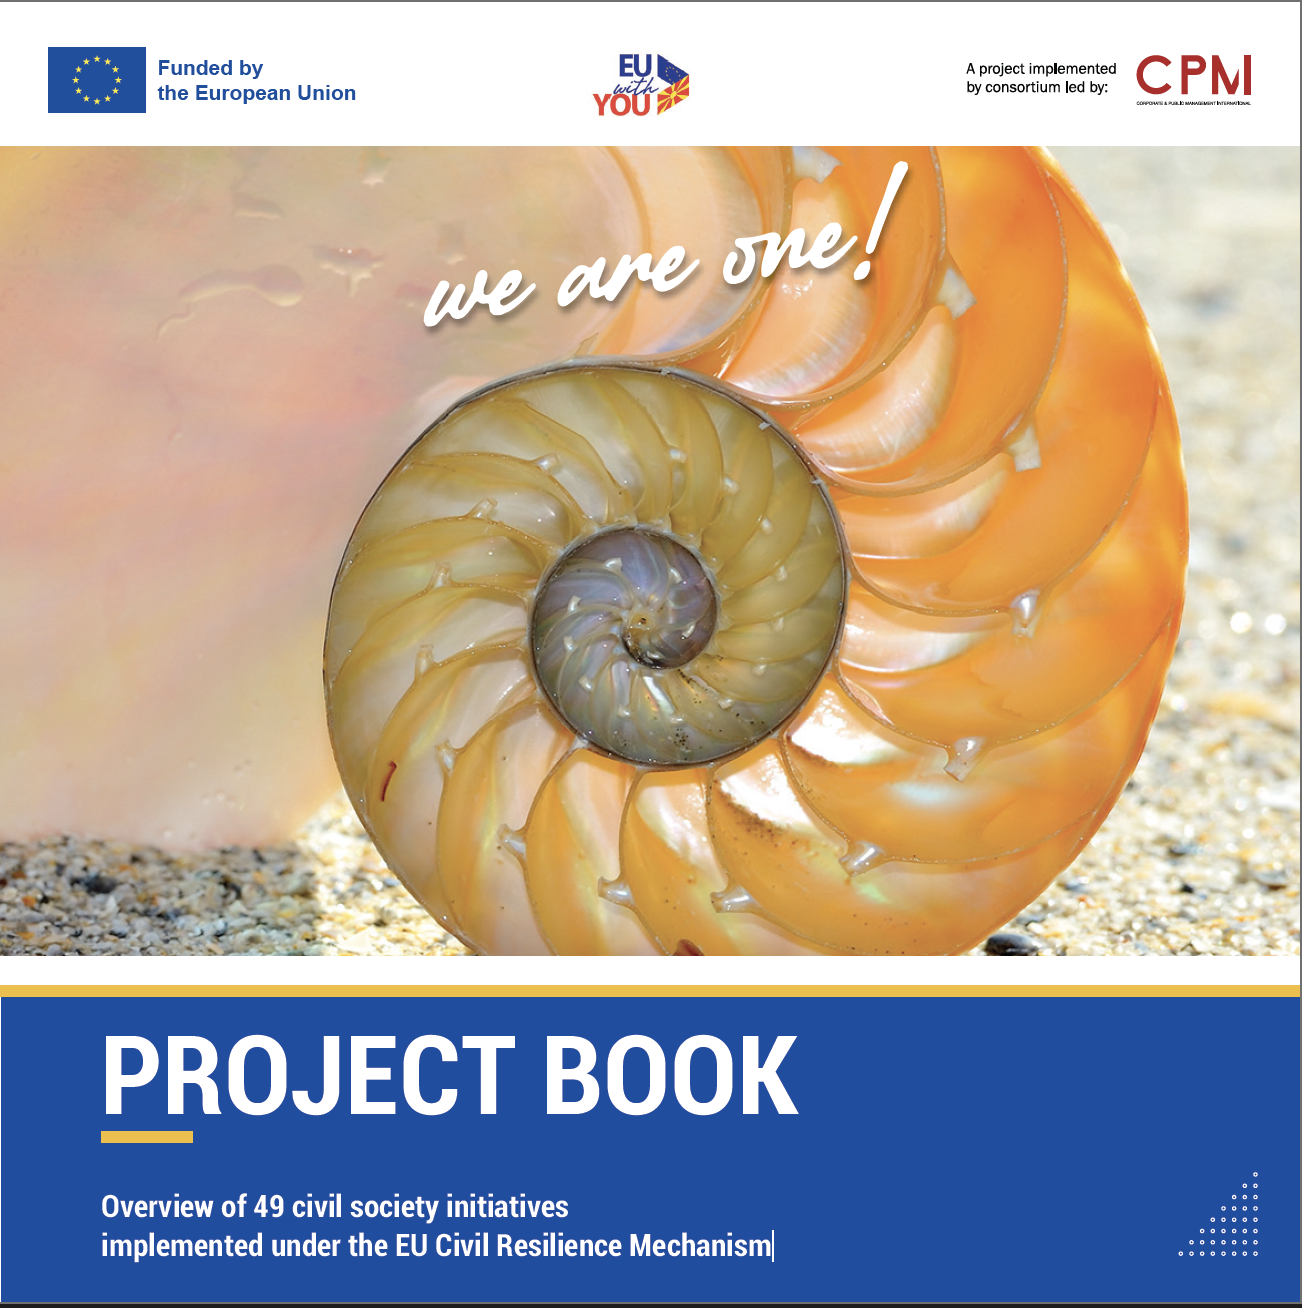 Project Book | Overview of 49 civil society initiatives implemented under the EU Civil Resilience Mechanism